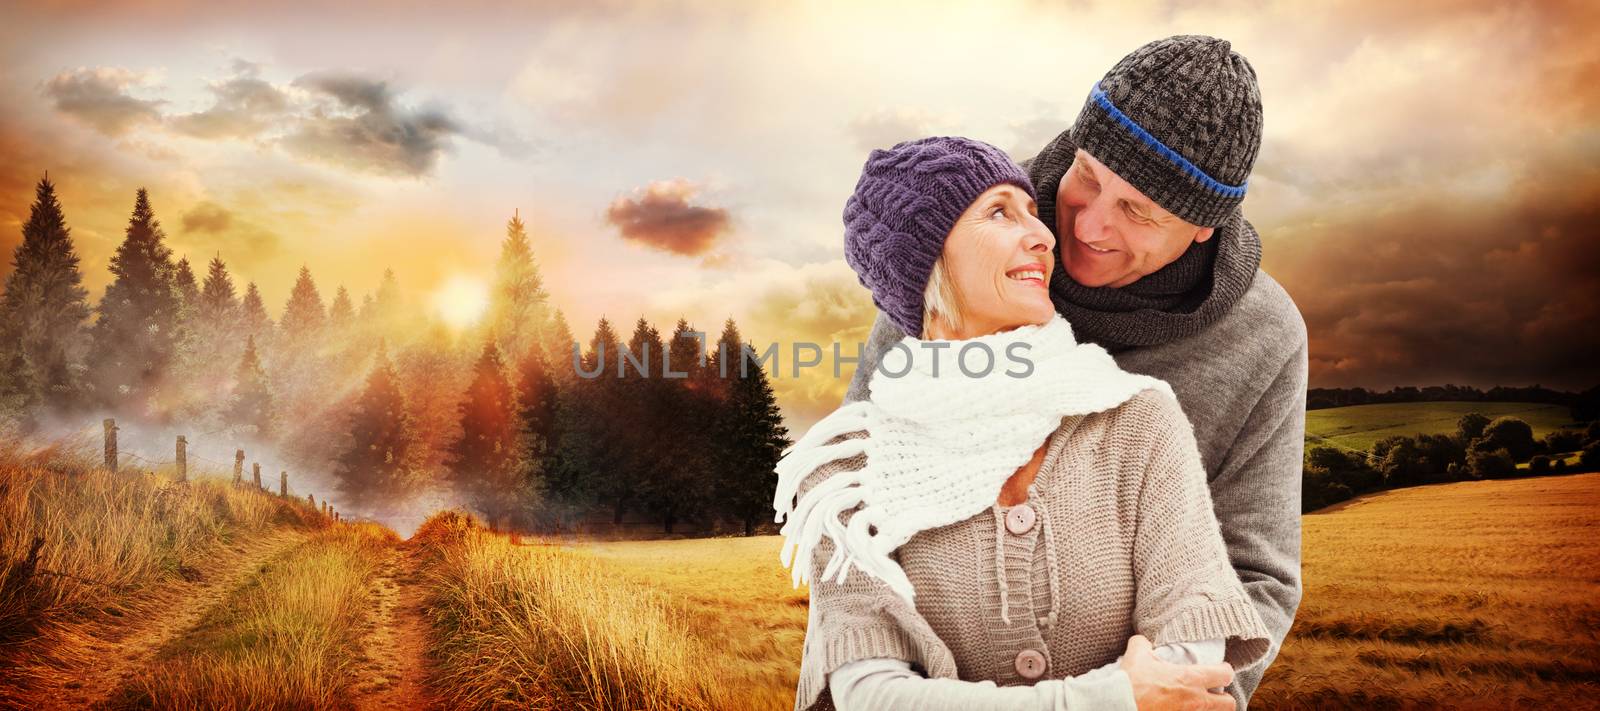 Happy mature couple in winter clothes embracing against country scene